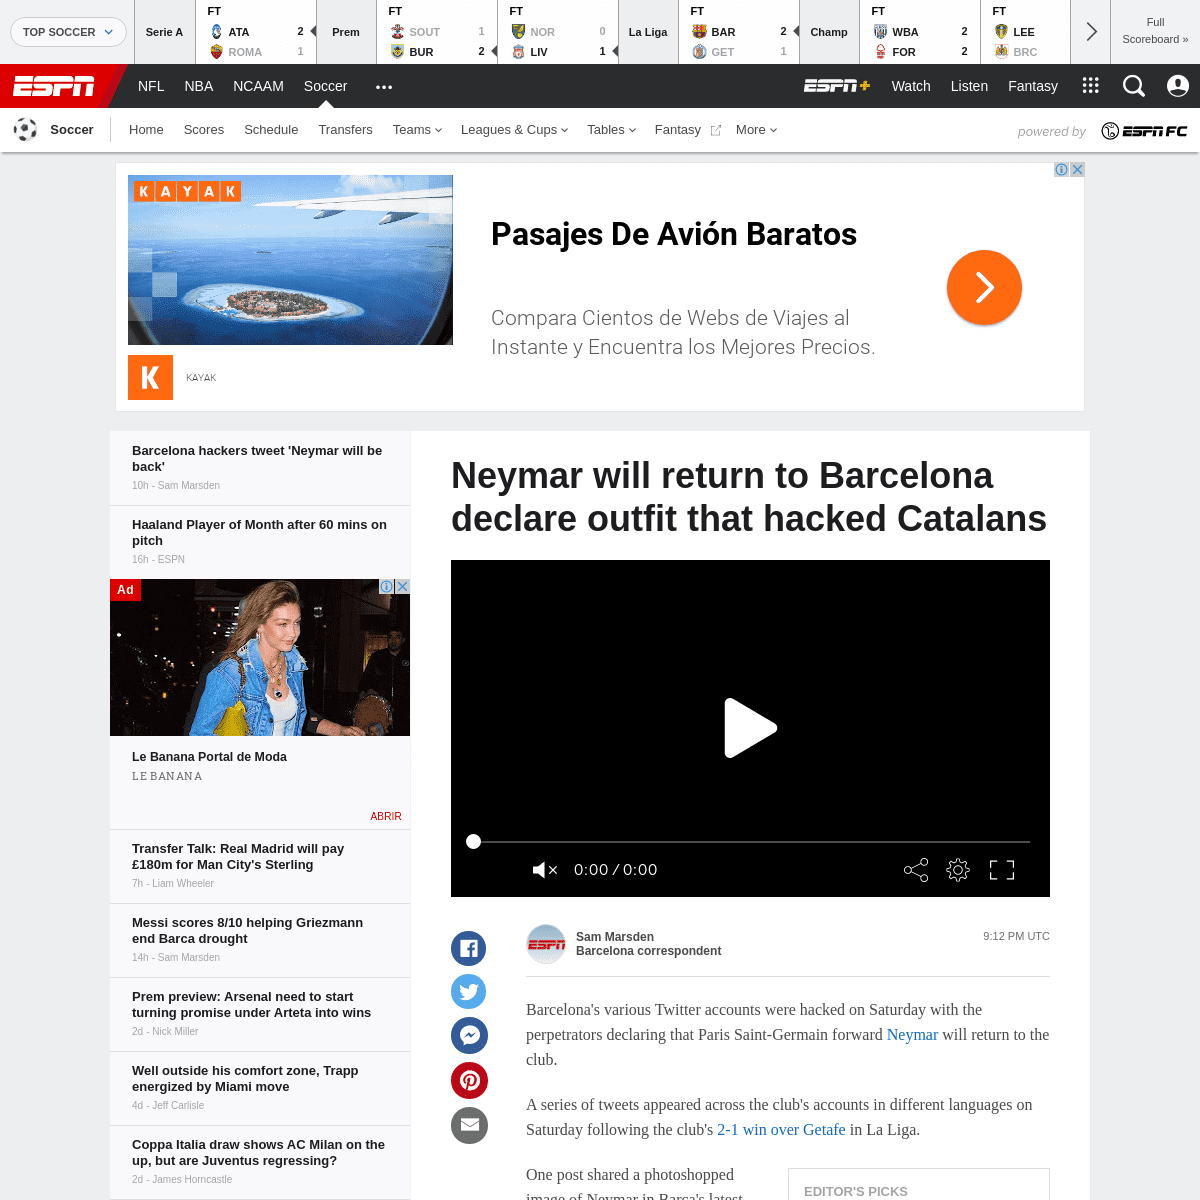 A complete backup of www.espn.com/soccer/barcelona/story/4053534/neymar-will-return-to-barcelona-declare-outfit-that-hacked-cata